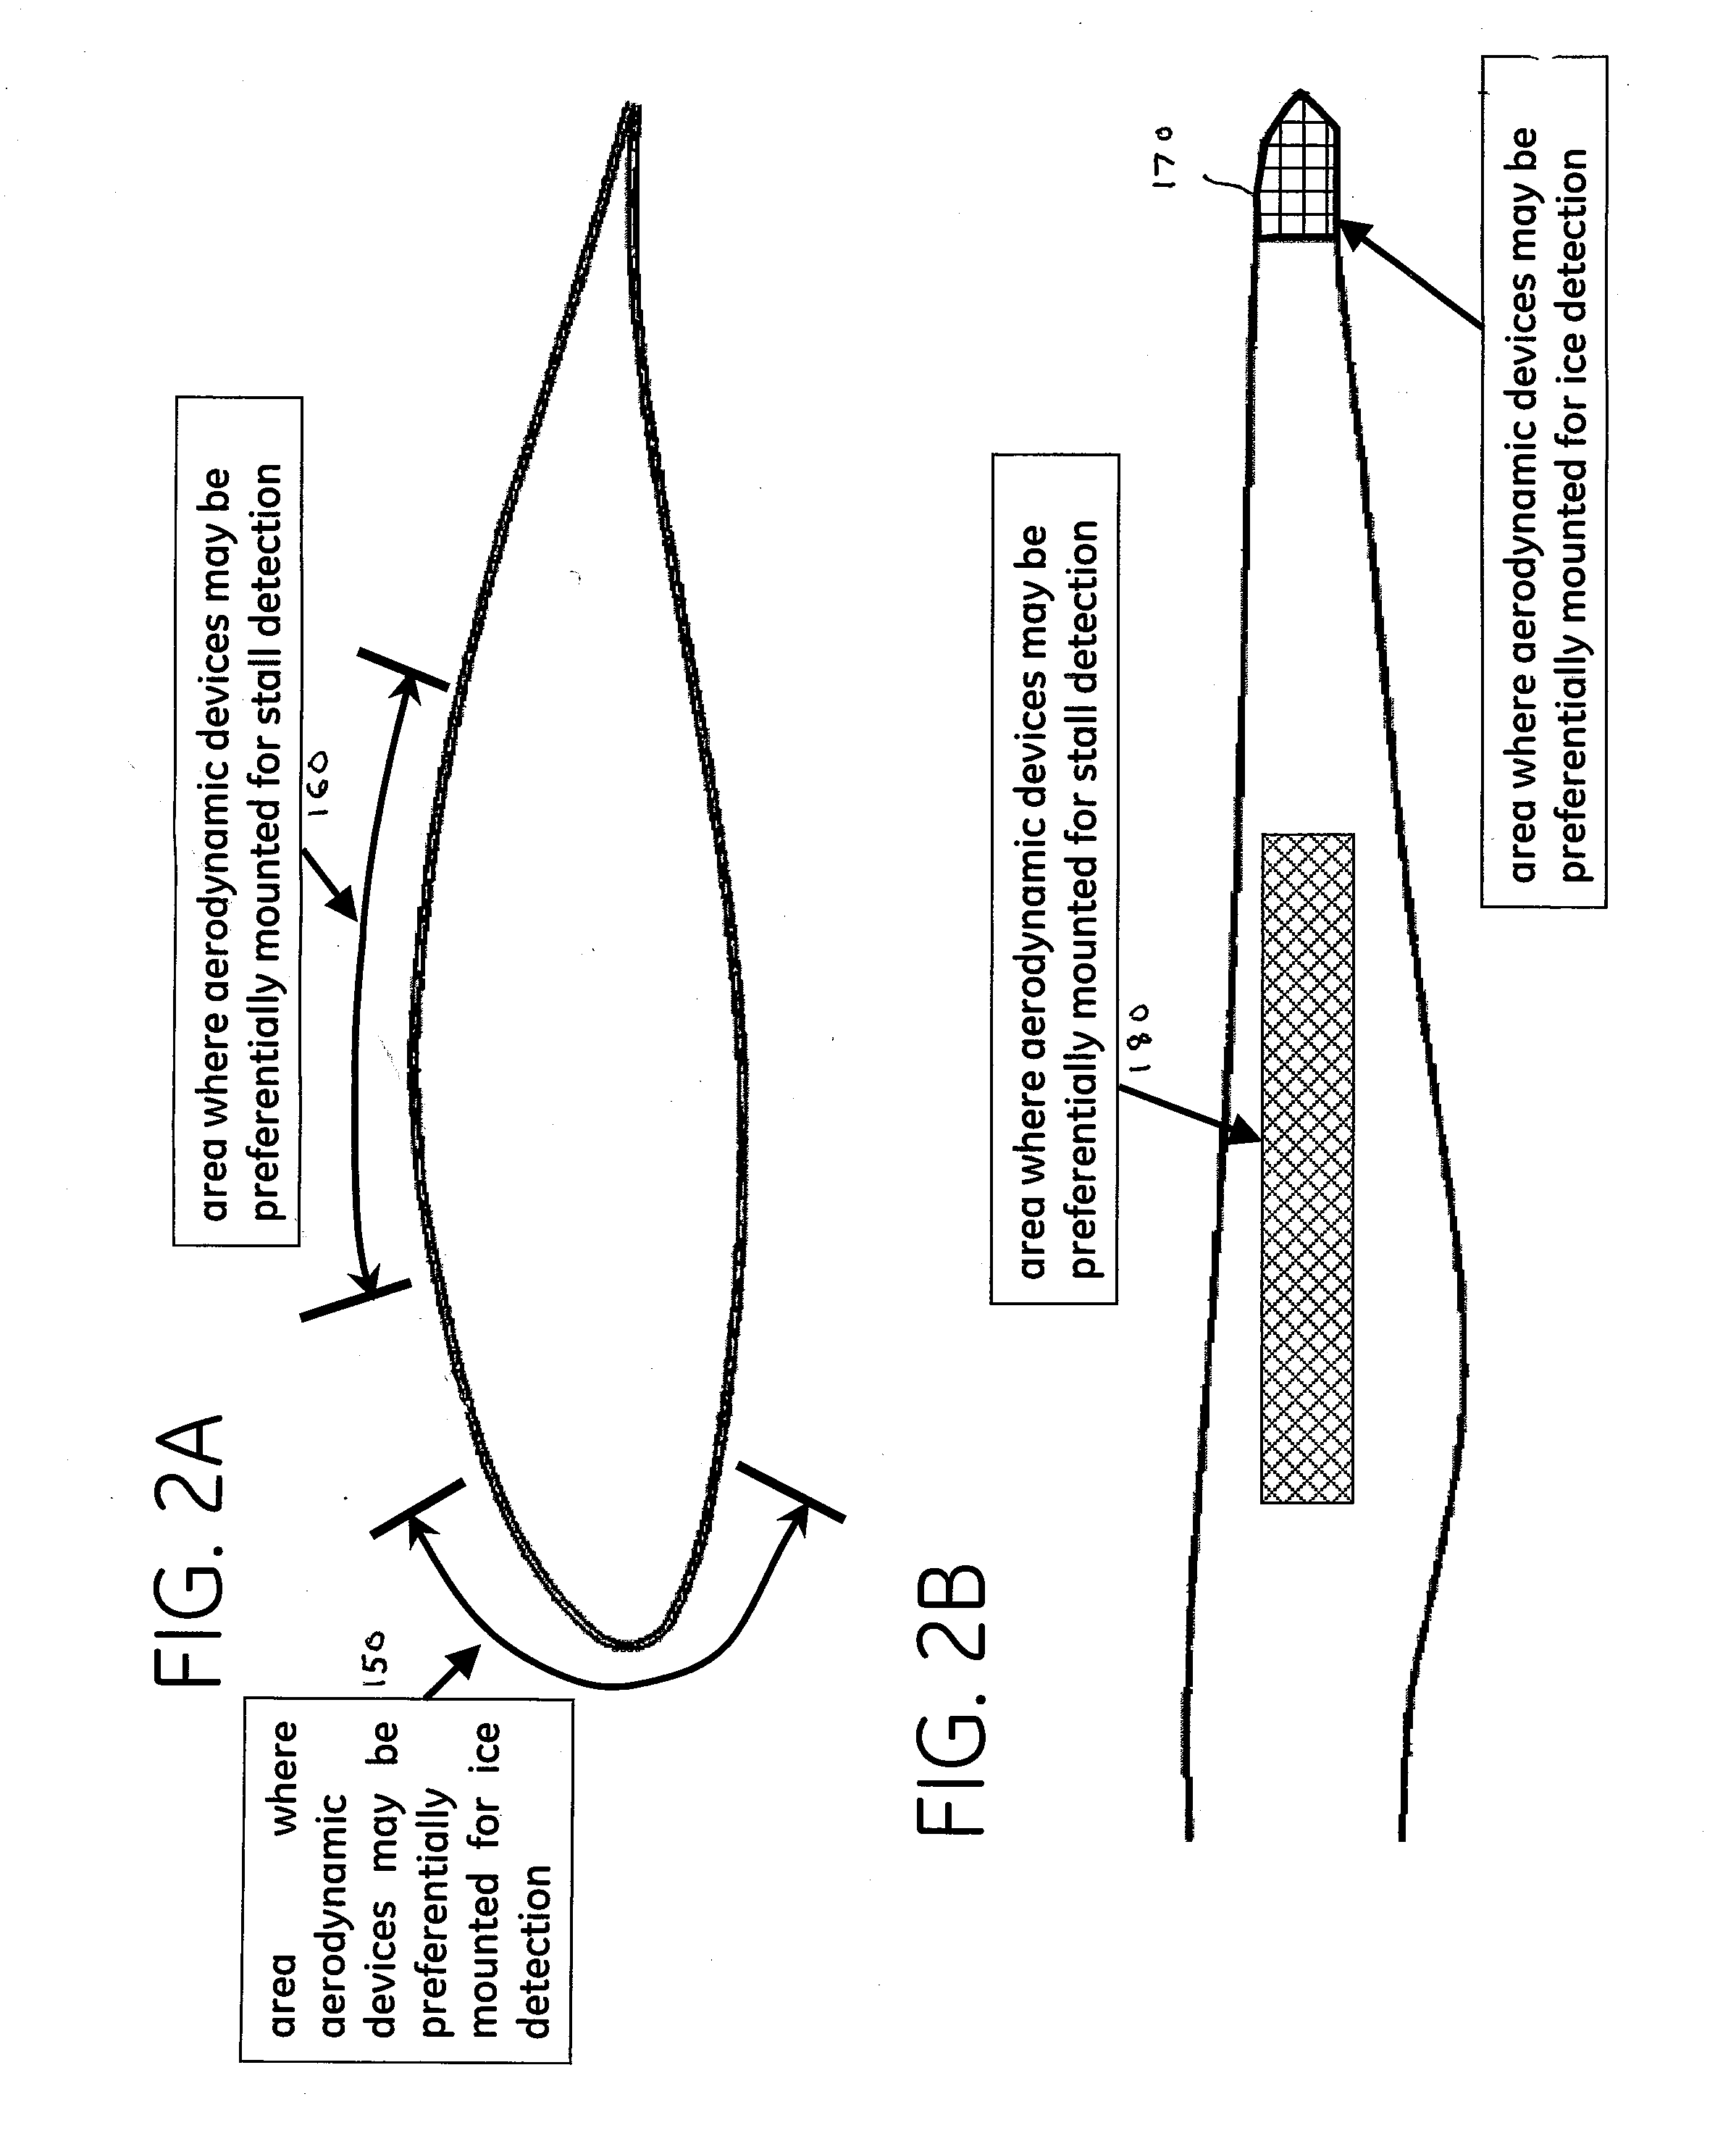 Aerodynamic device for detection of wind turbine blade operation